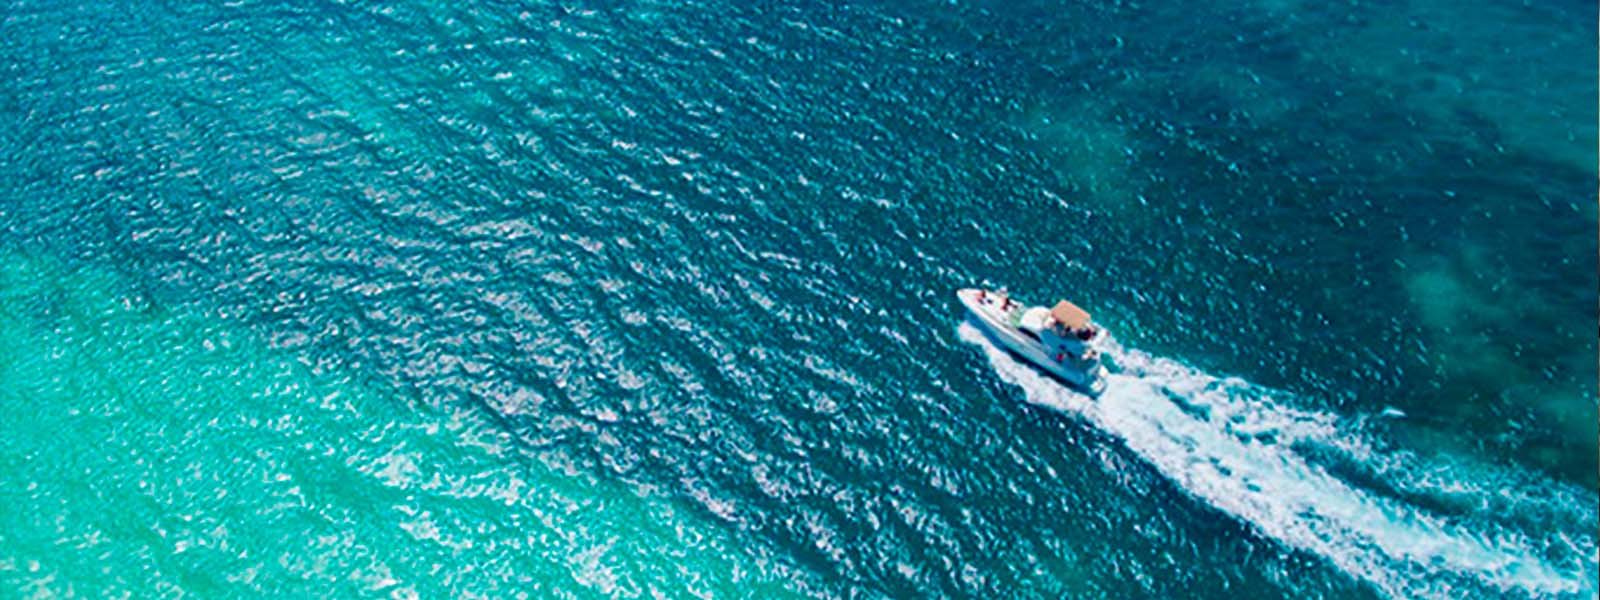 Boat for activities in the sea of Isla Mujeres